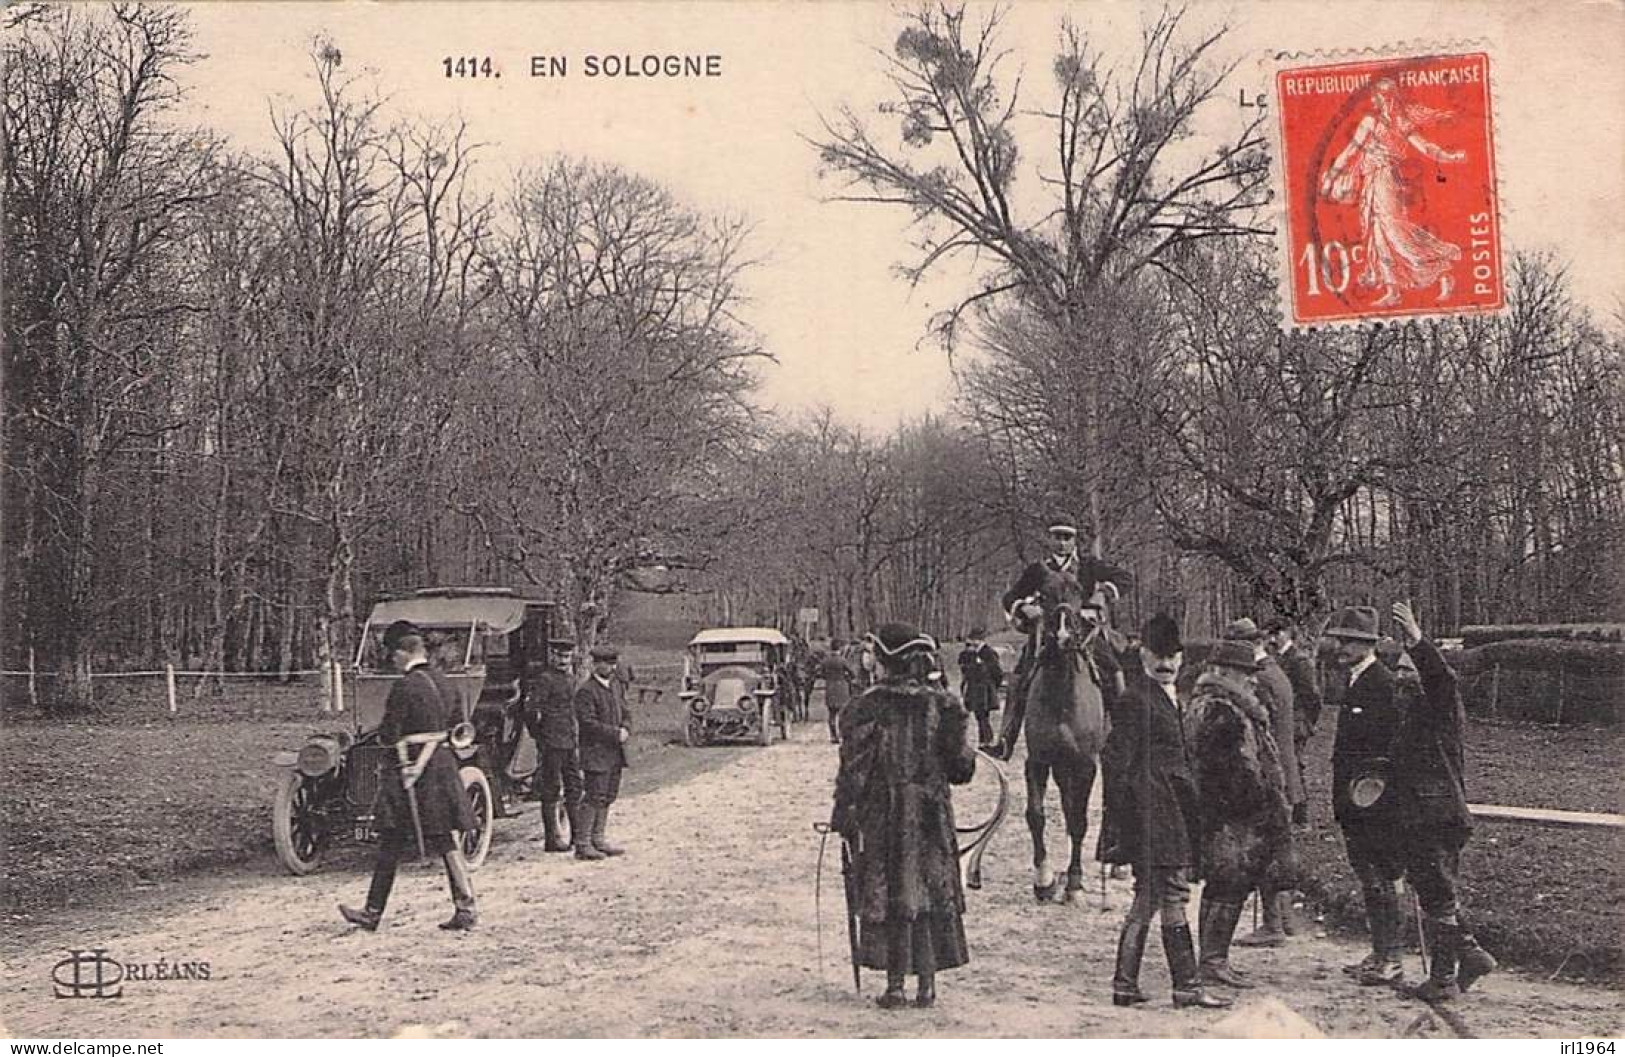 EN SOLOGNE CHASSE A COURRE N° 1414 1913 - Hunting